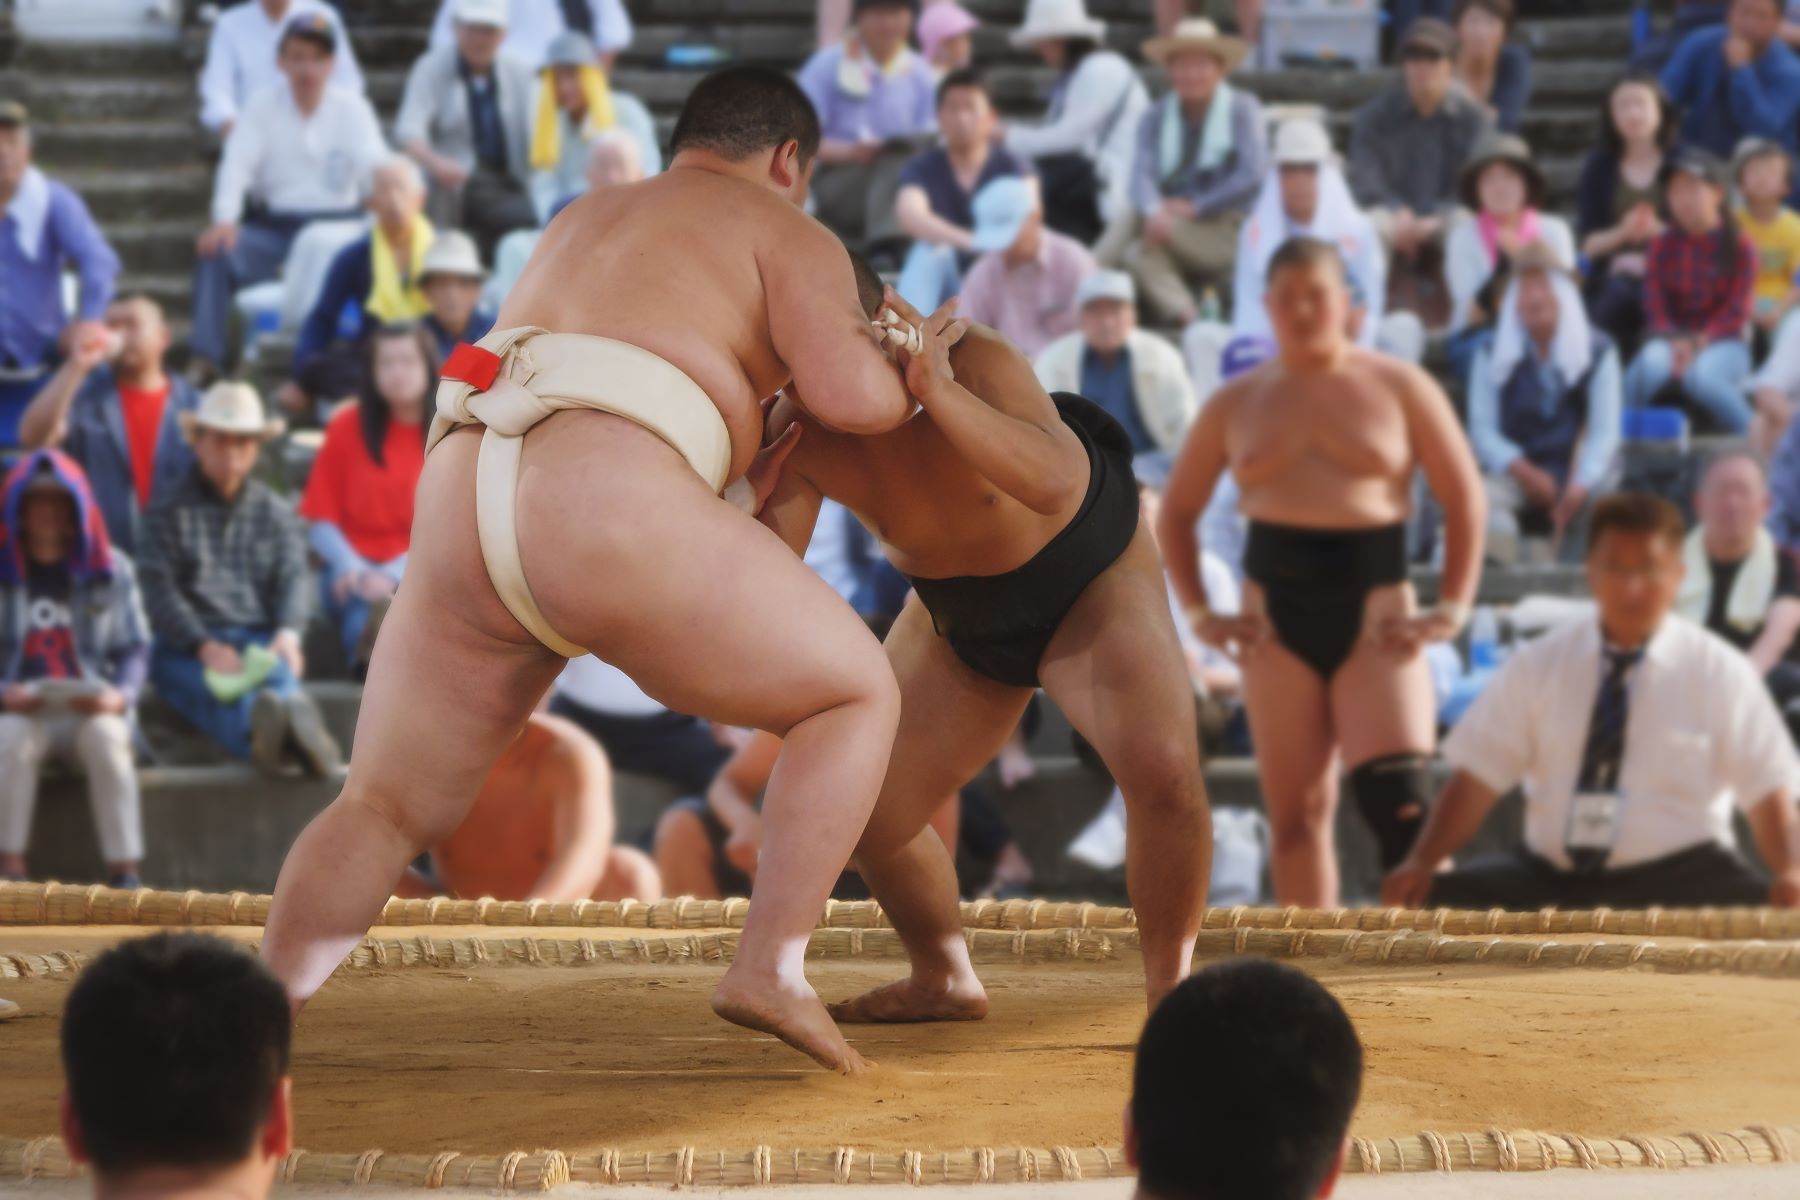 An audience watching a sumo wrestling fight in Japan